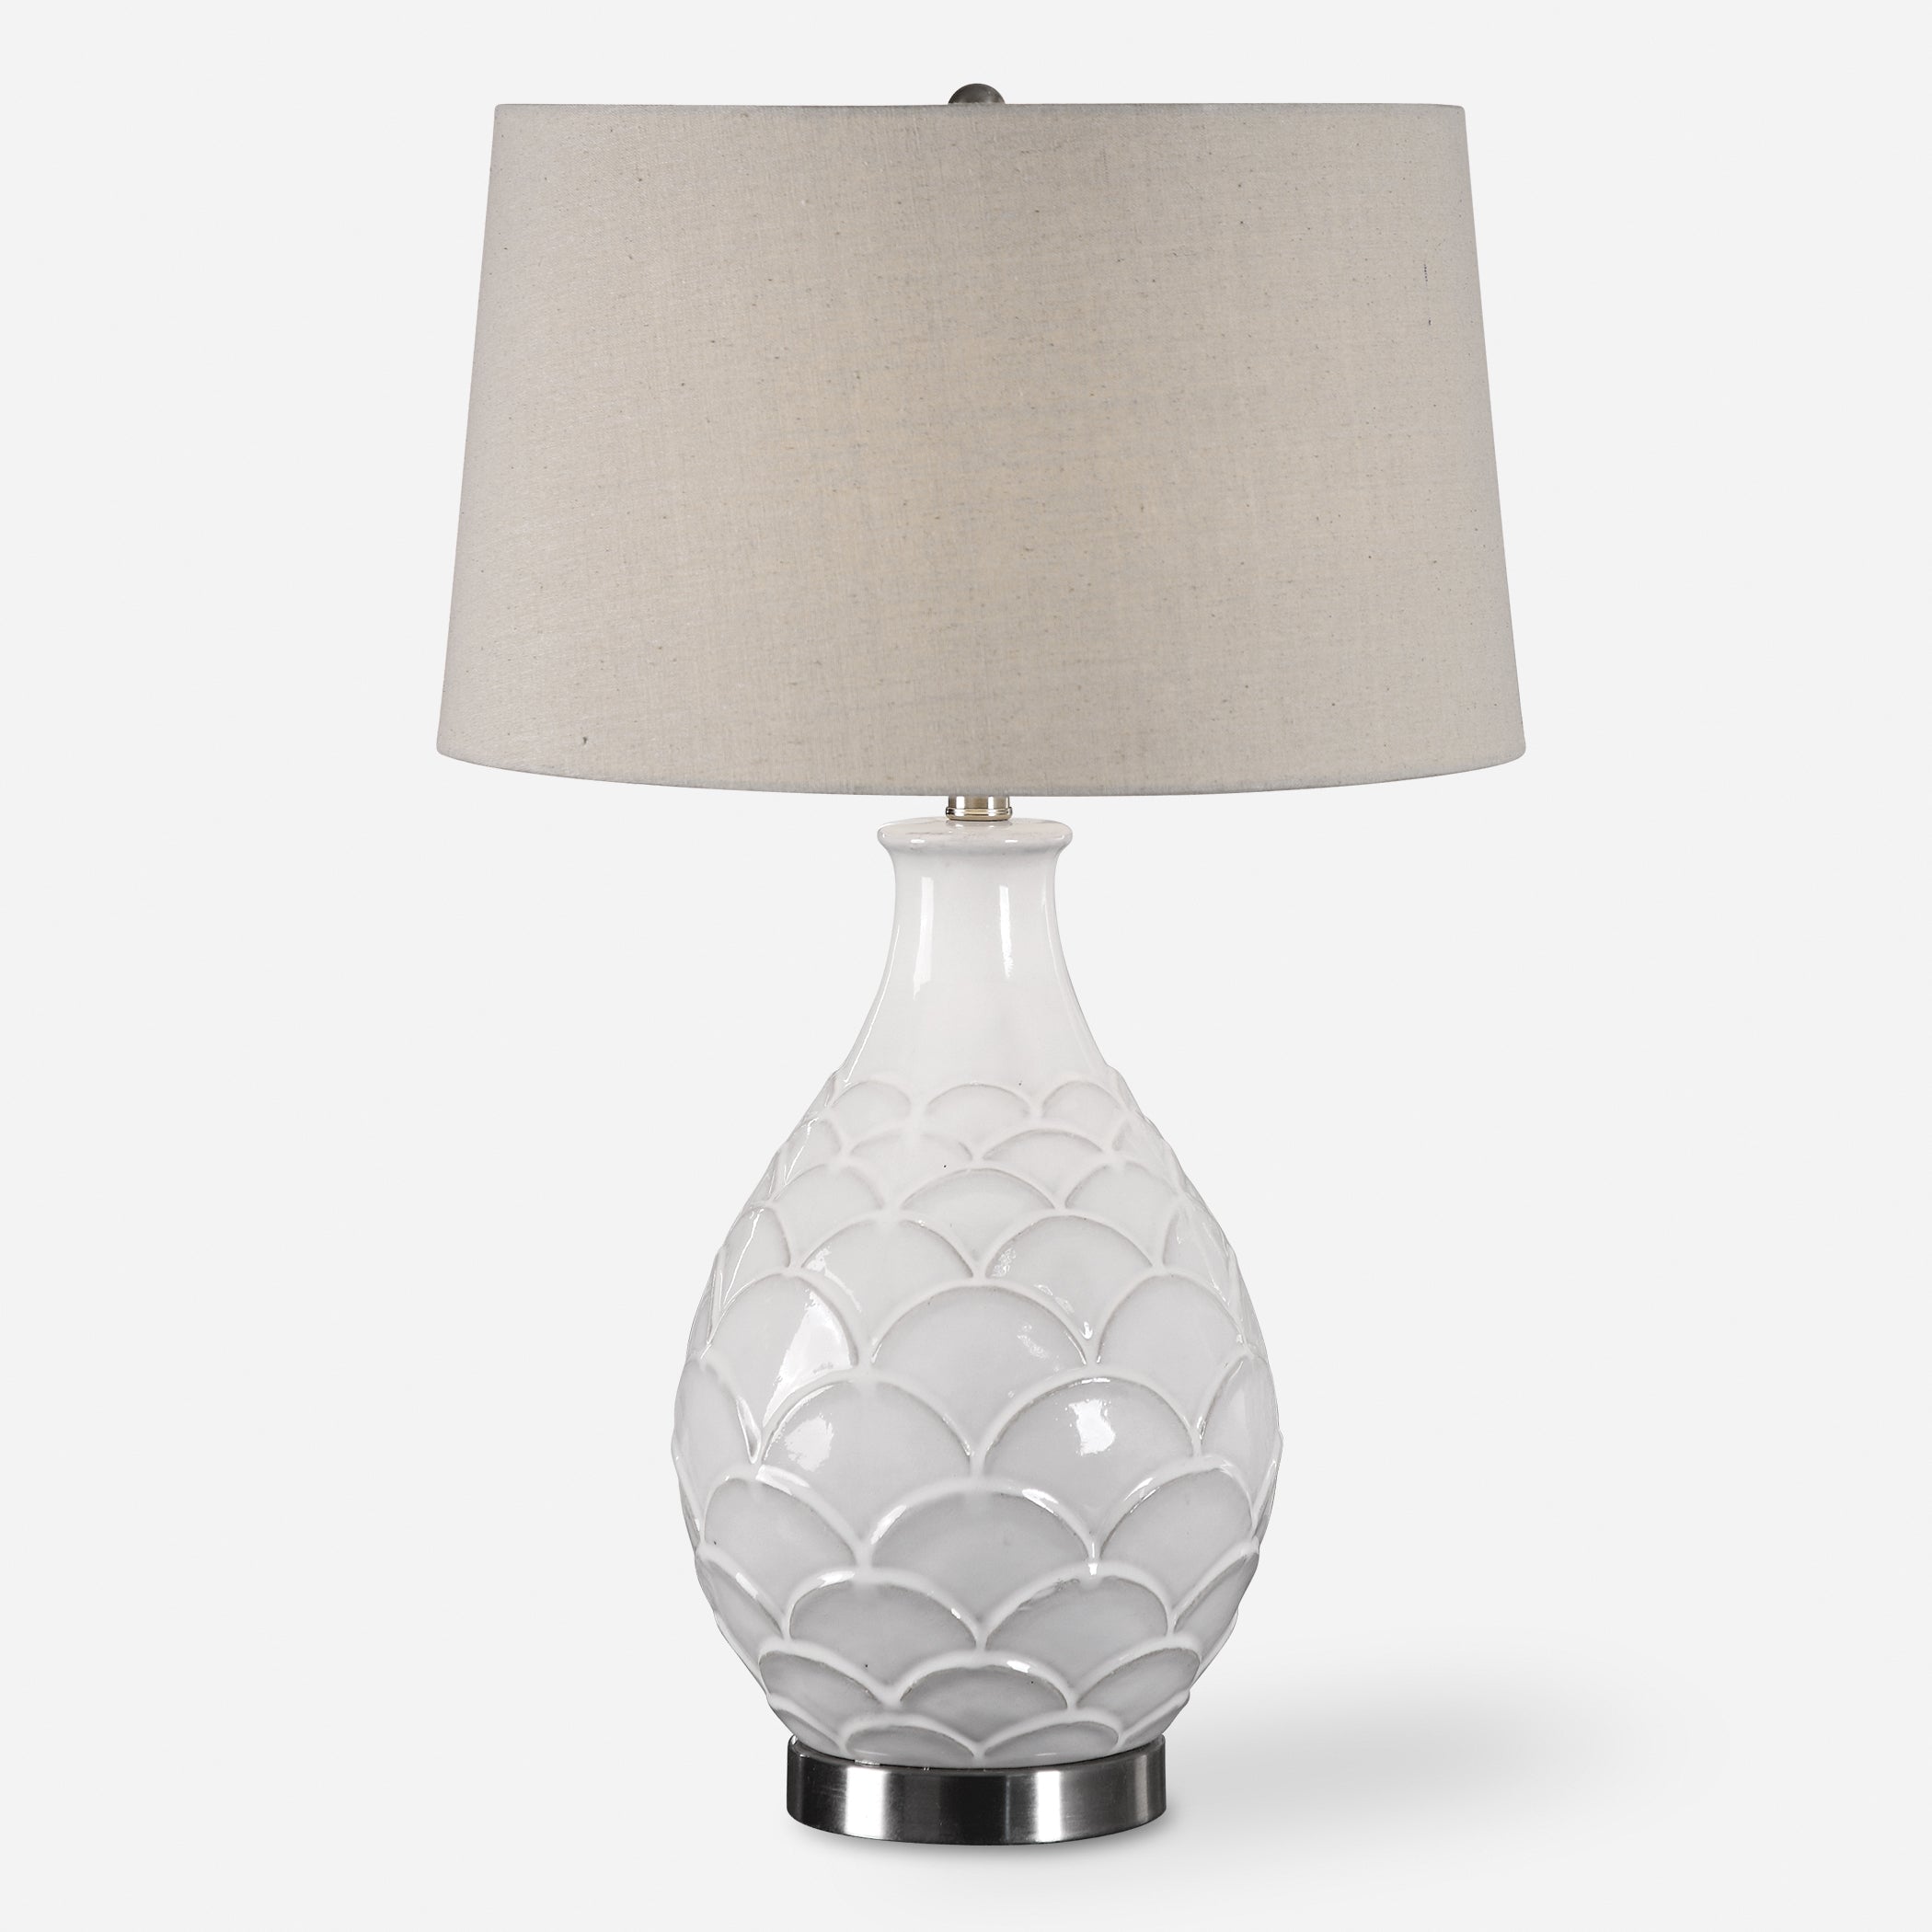 Uttermost Camellia Glossed White Table Lamp Glossed White Table Lamp Uttermost   